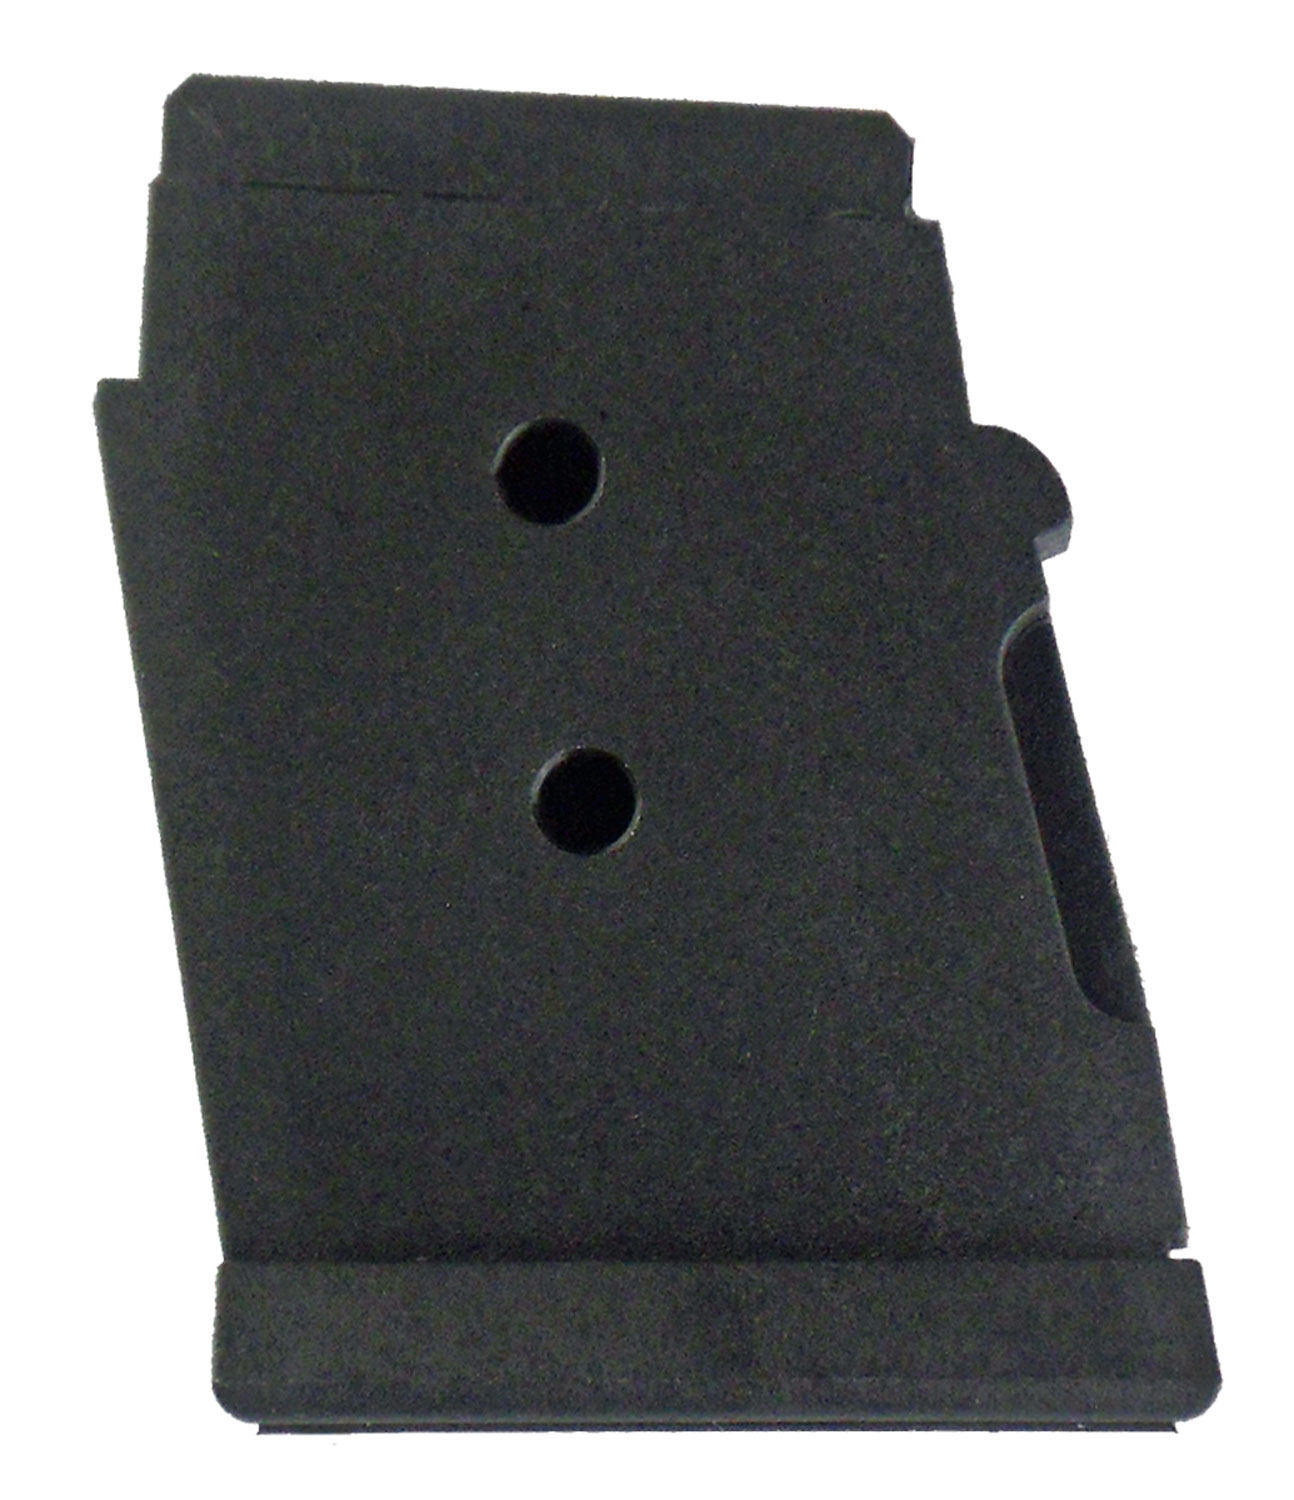 CZ-USA 12005 Single Shot Adapter  made of Polymer with Black Finish for 22 LR, 17 HM2 CZ 457, 512, 455 & 452